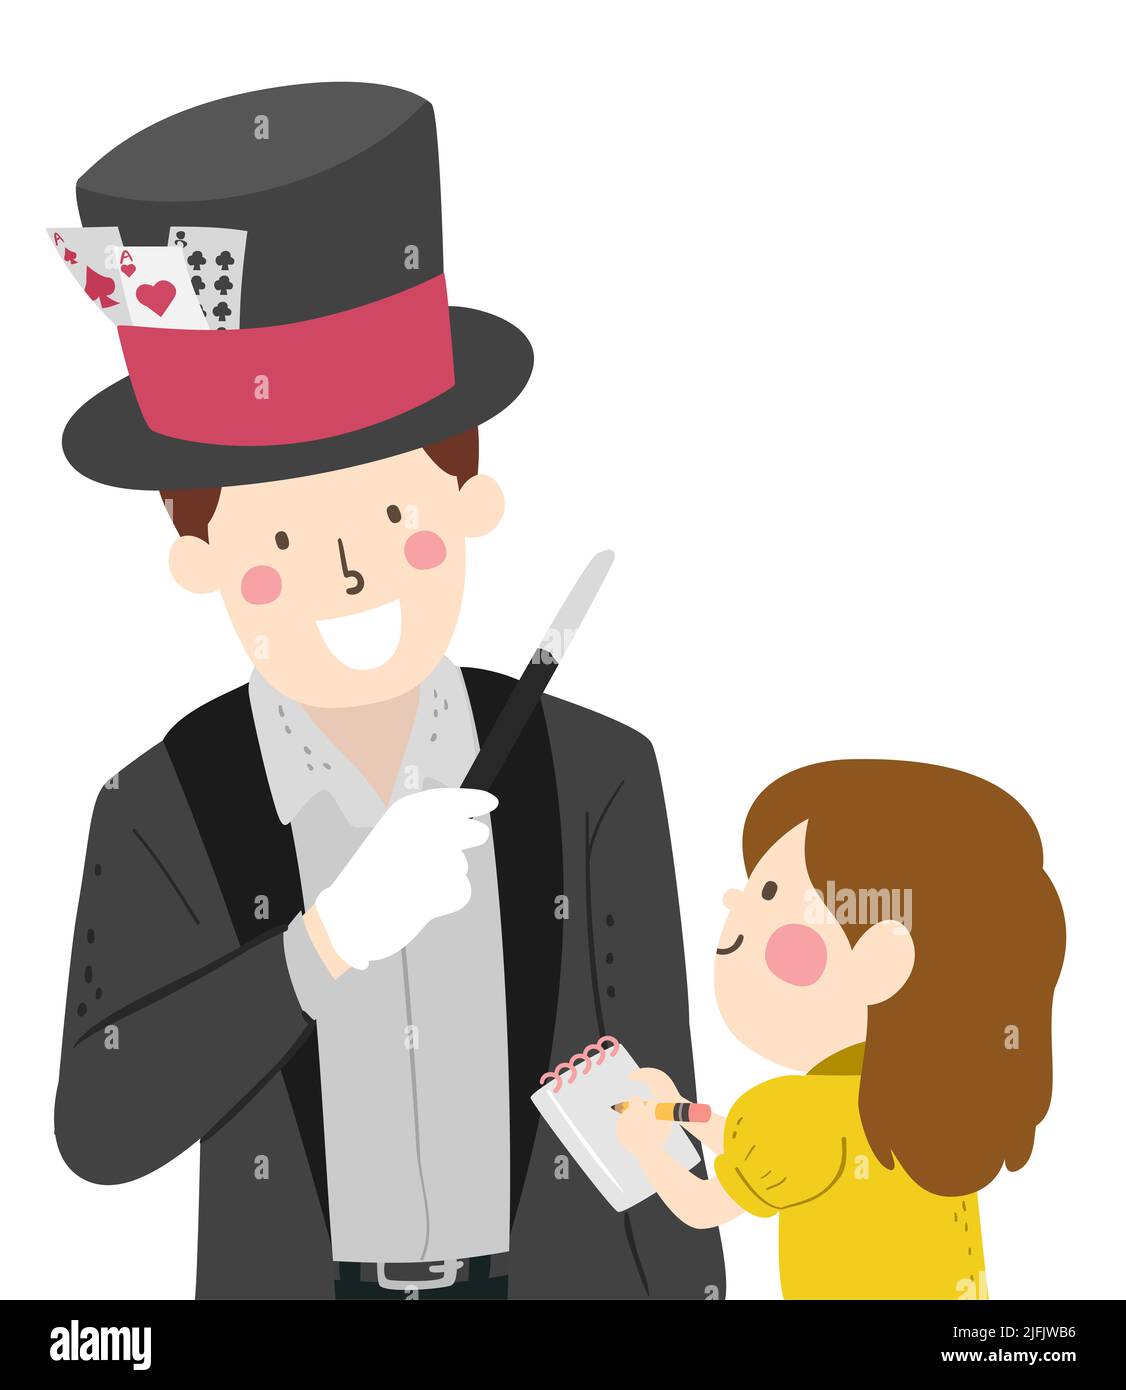 Illustration of Man Magician Wearing Top Hat with Magic Cards, Holding Magic Wand and Kid Girl Asks Interview Questions and Take Notes Stock Photo